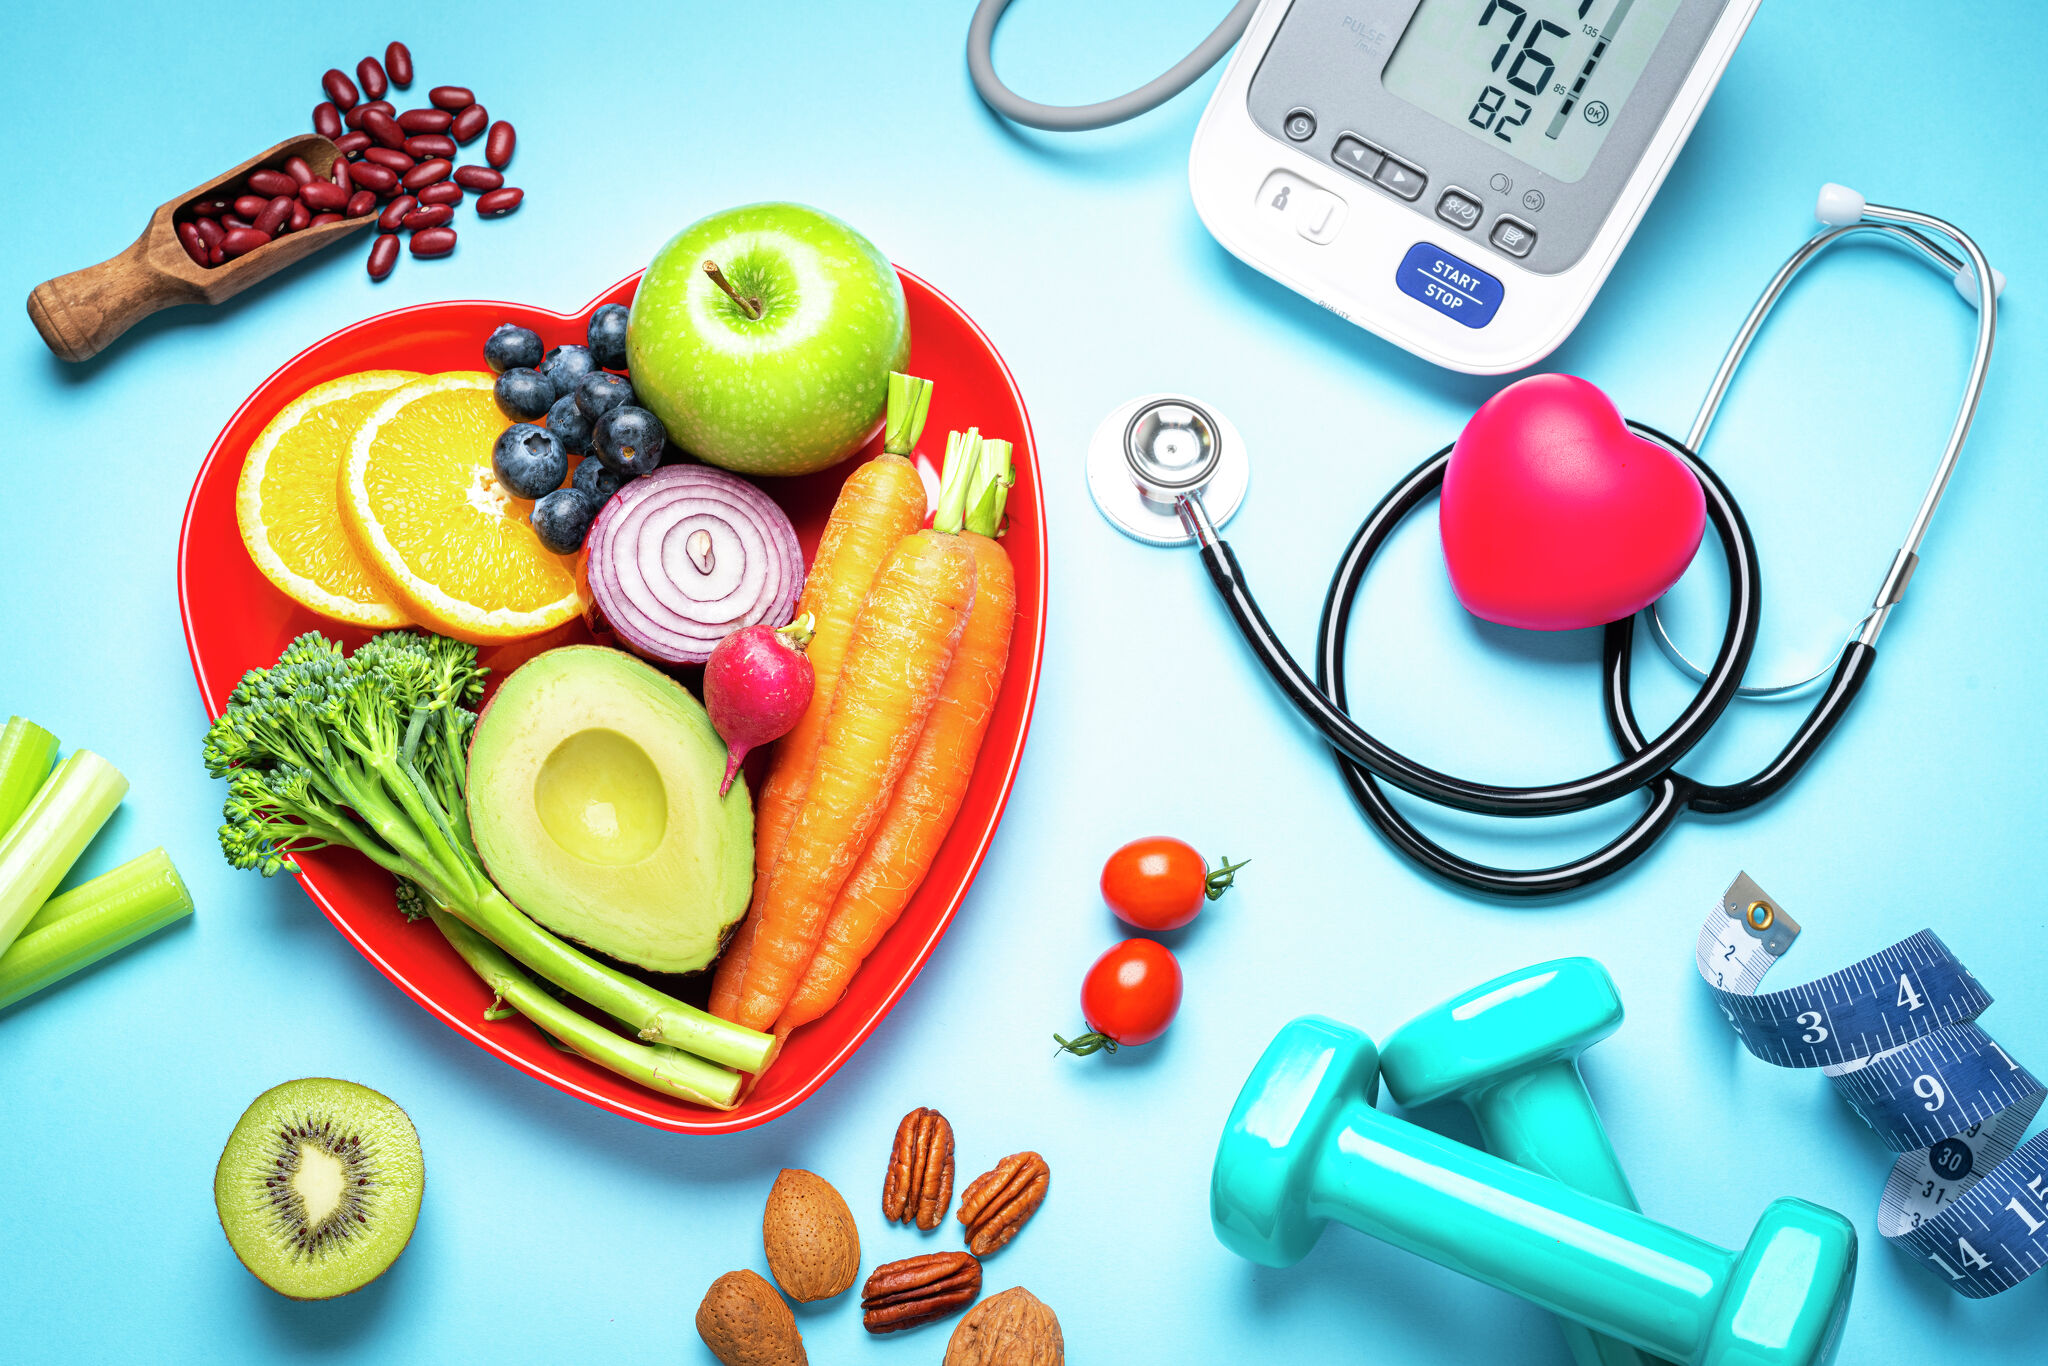 Here are 6 healthy tips to lower your high blood pressure